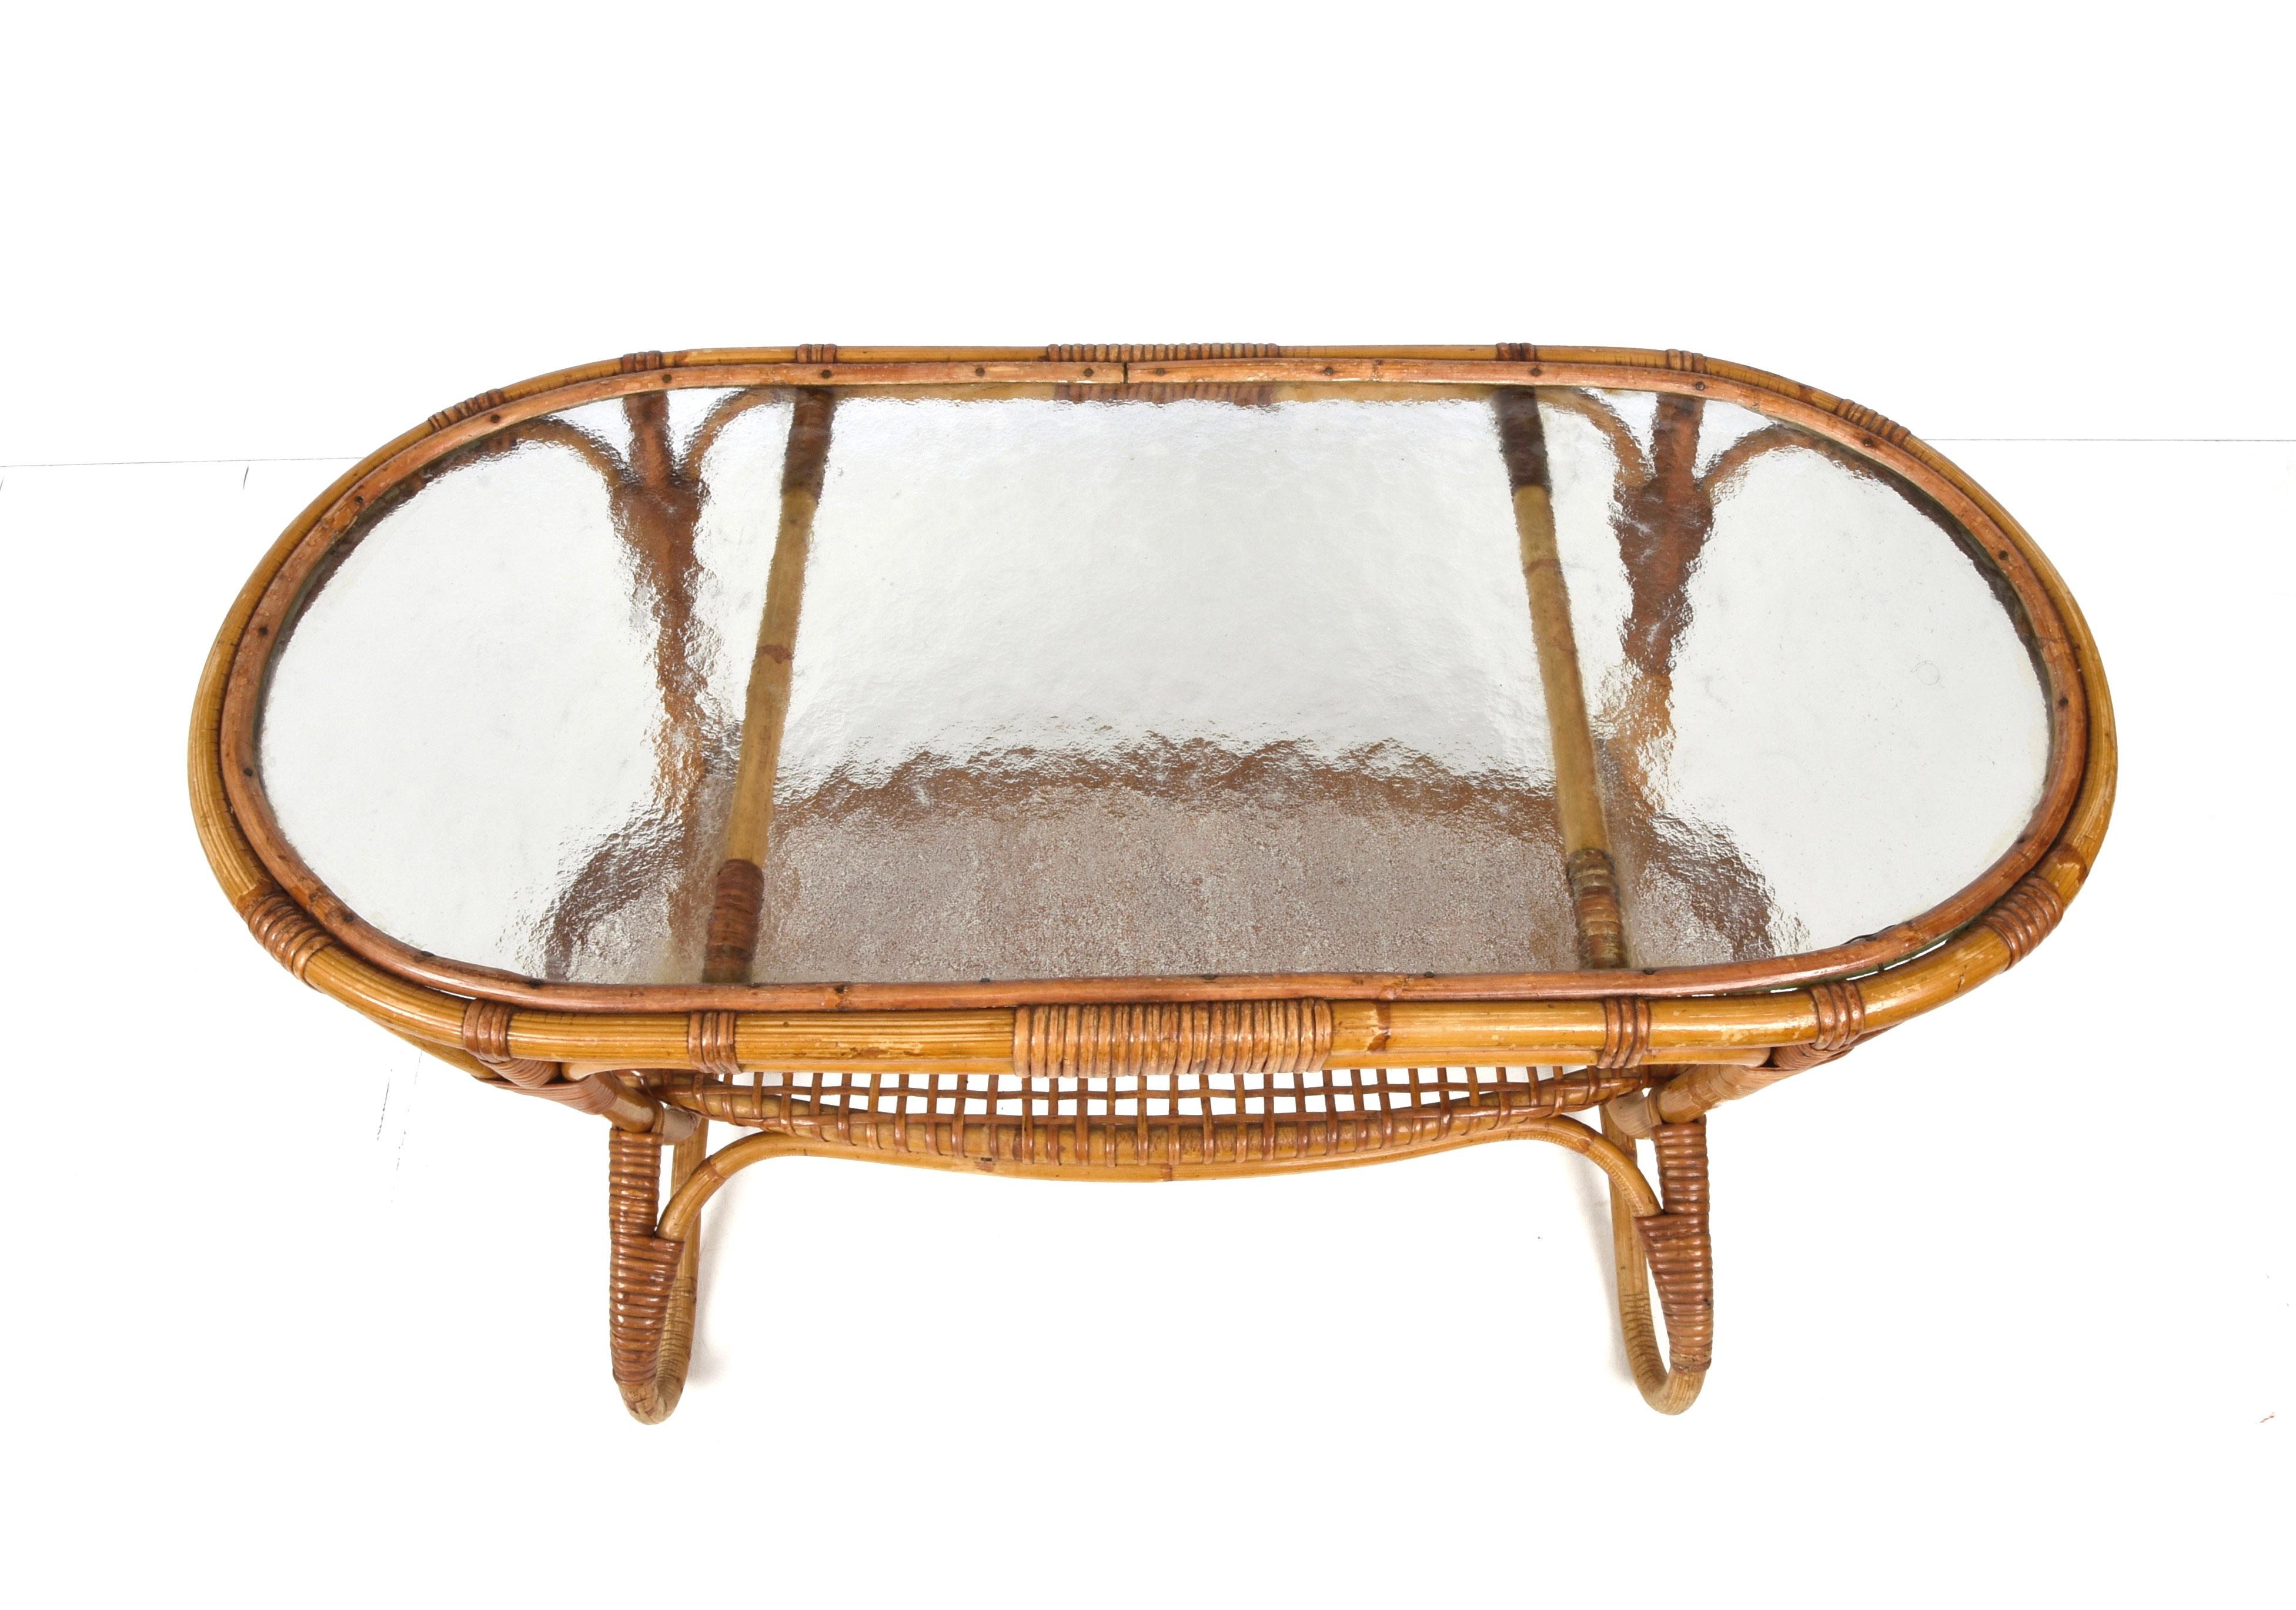 Midcentury Oval Rattan and Bamboo Dutch Coffee Table with Glass Top, 1950s For Sale 2